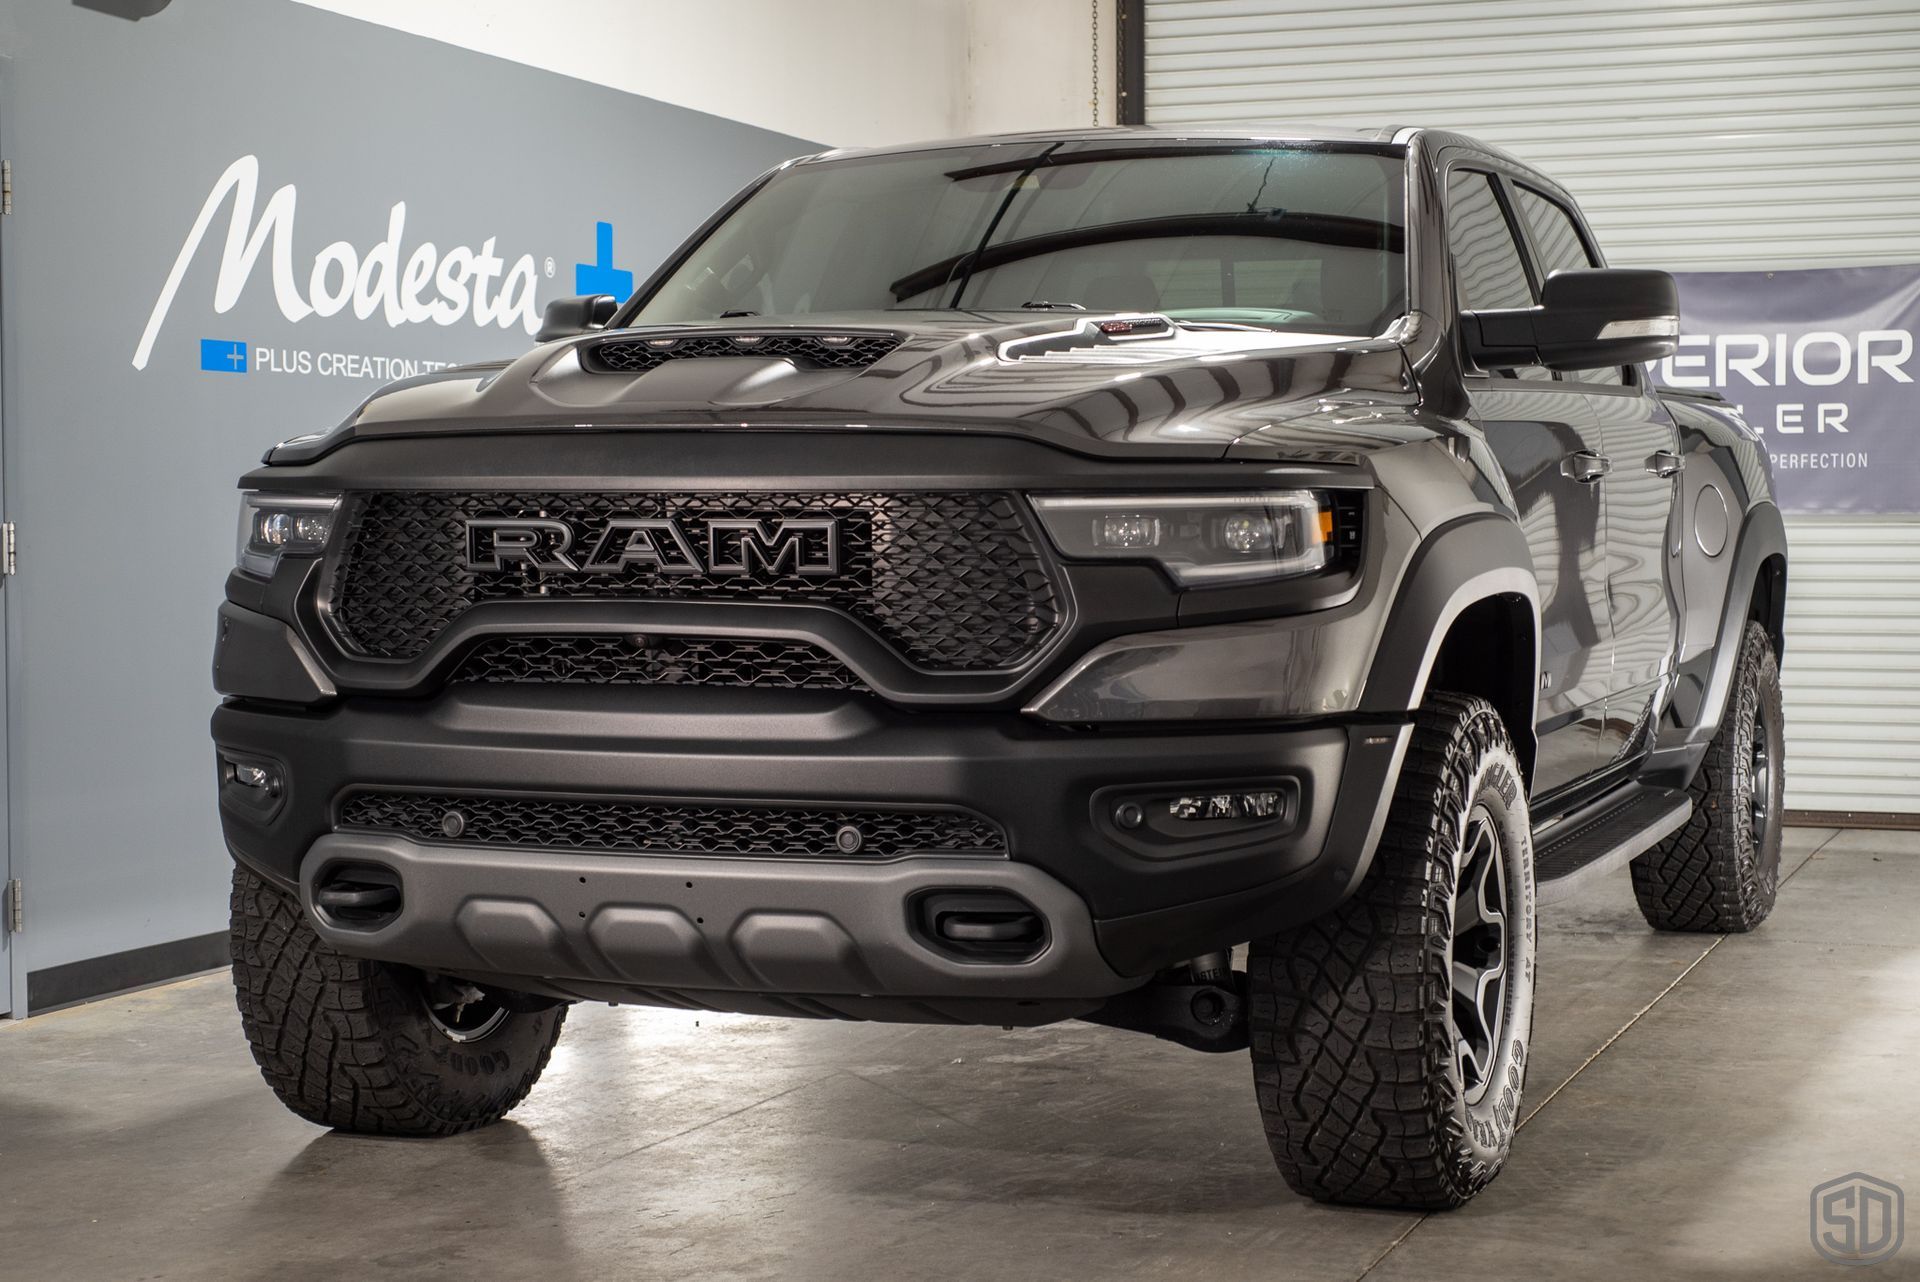 RAM TRX Protected with Modesta Coatings Inside and Out Orlando, FL